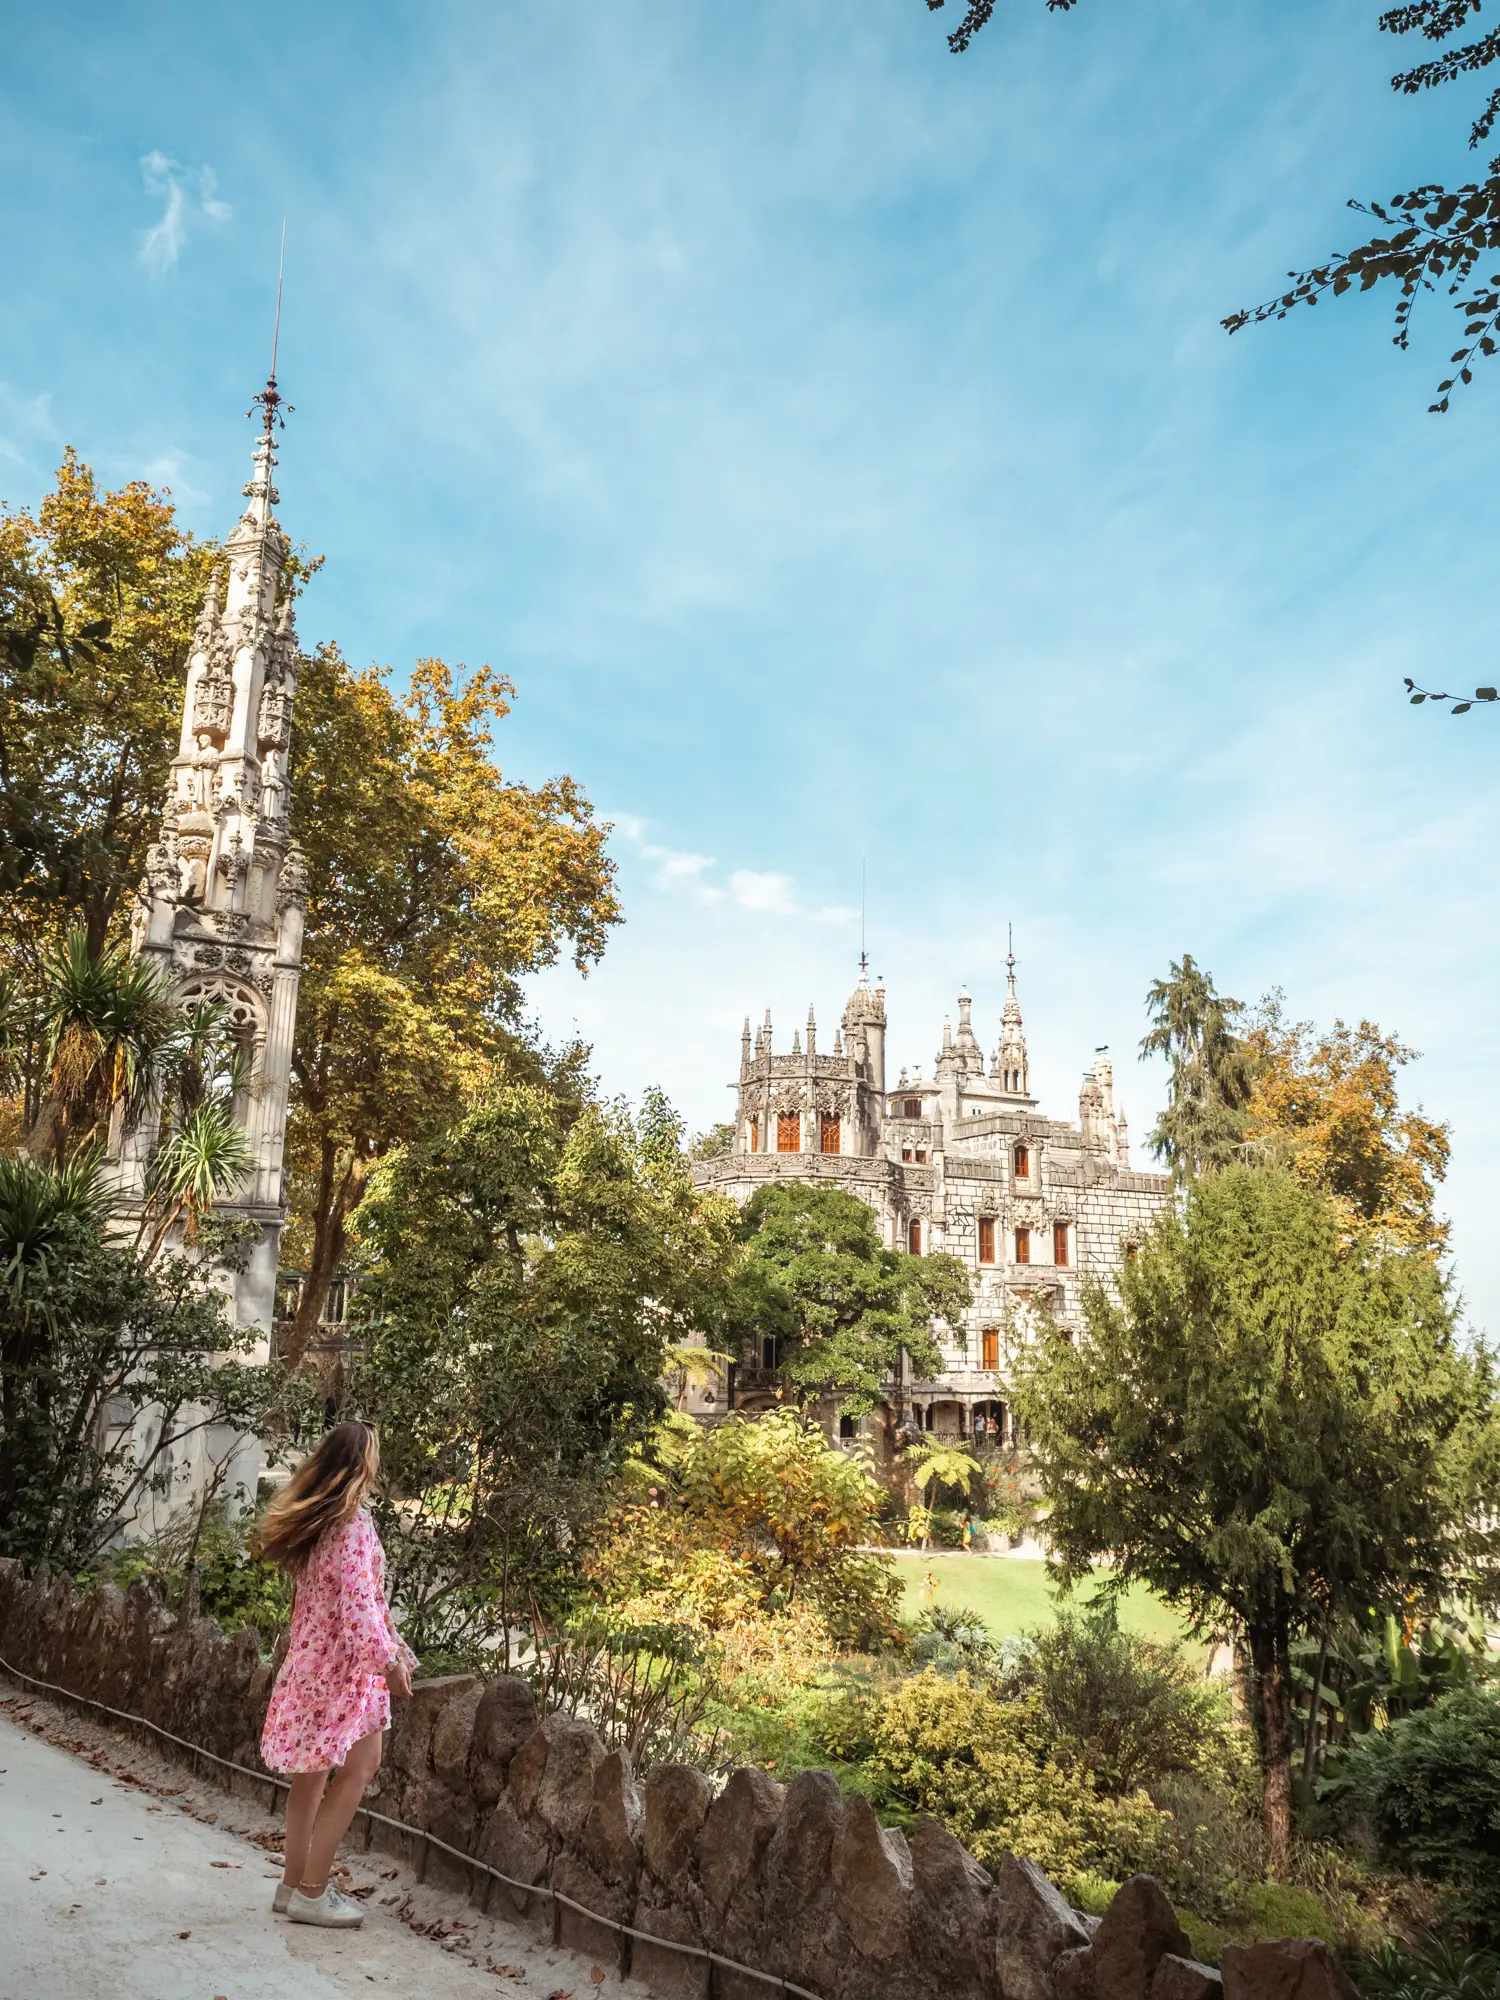 Girl with long dark blonde hair, in a pink dress, standing in front of the lush gardens of Quinta da Regaleira in Sintra, looking towards a 19th century grey stone palace with spires.